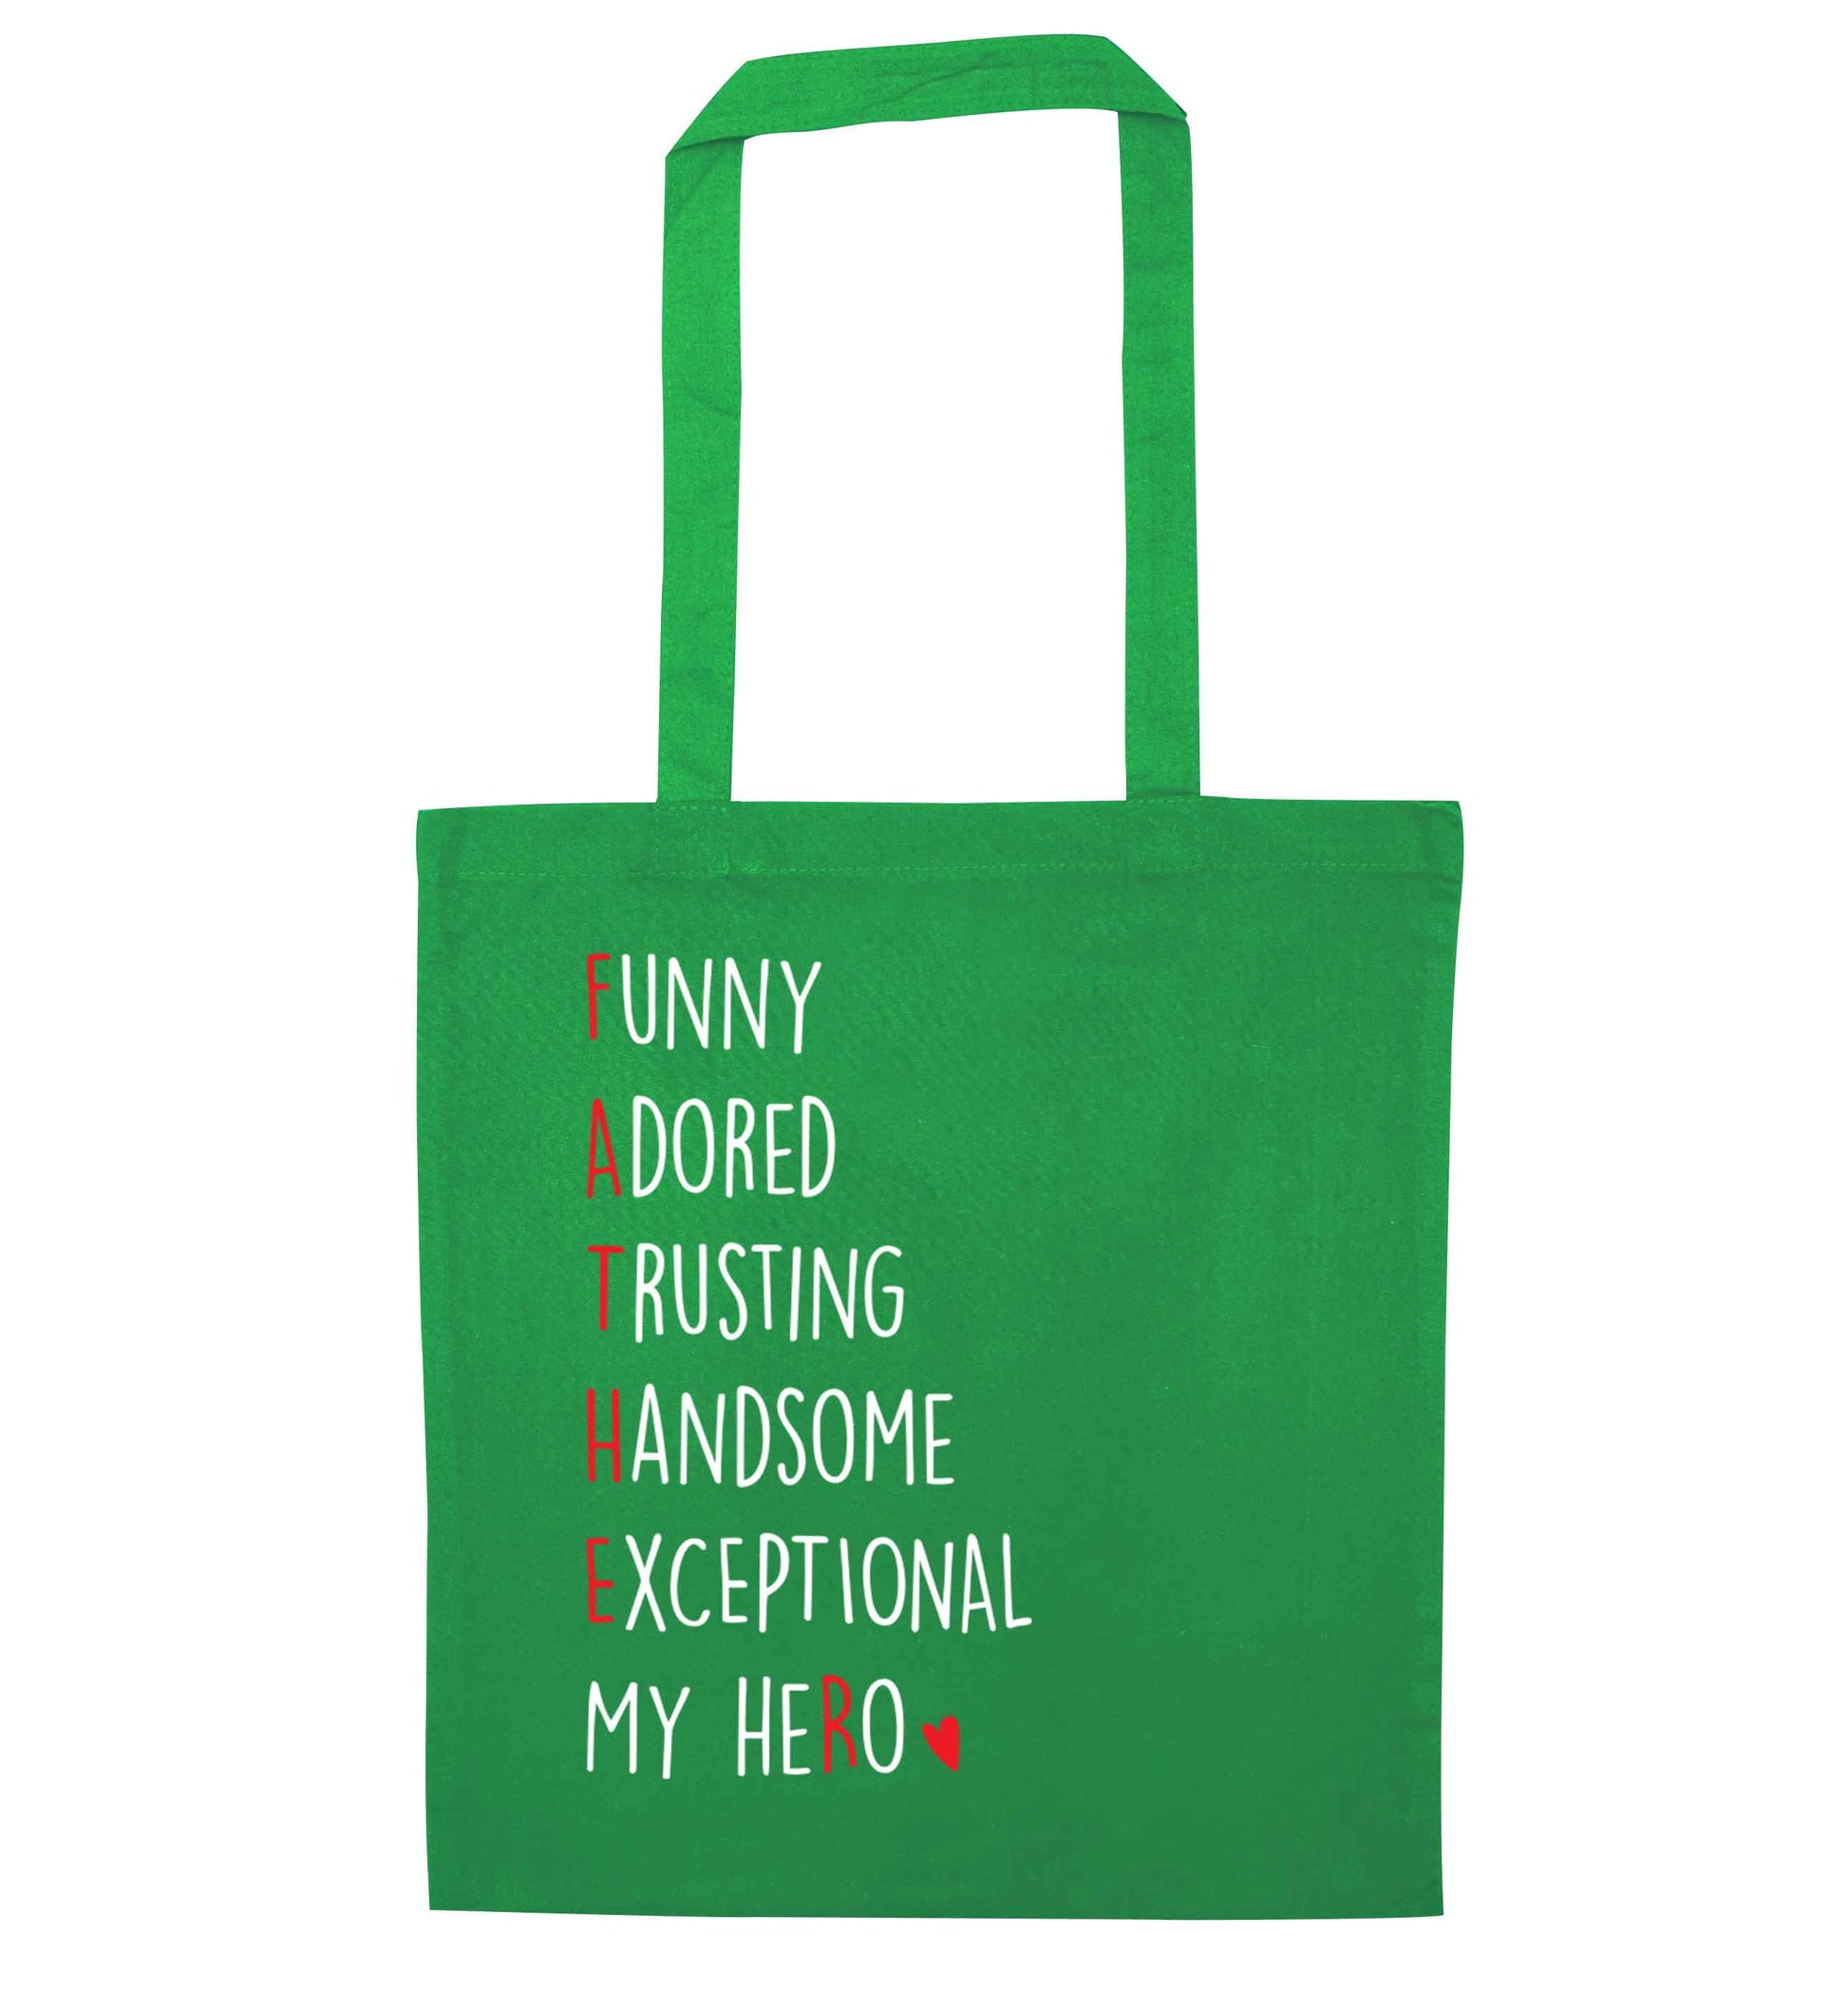 Father meaning hero acrostic poem green tote bag